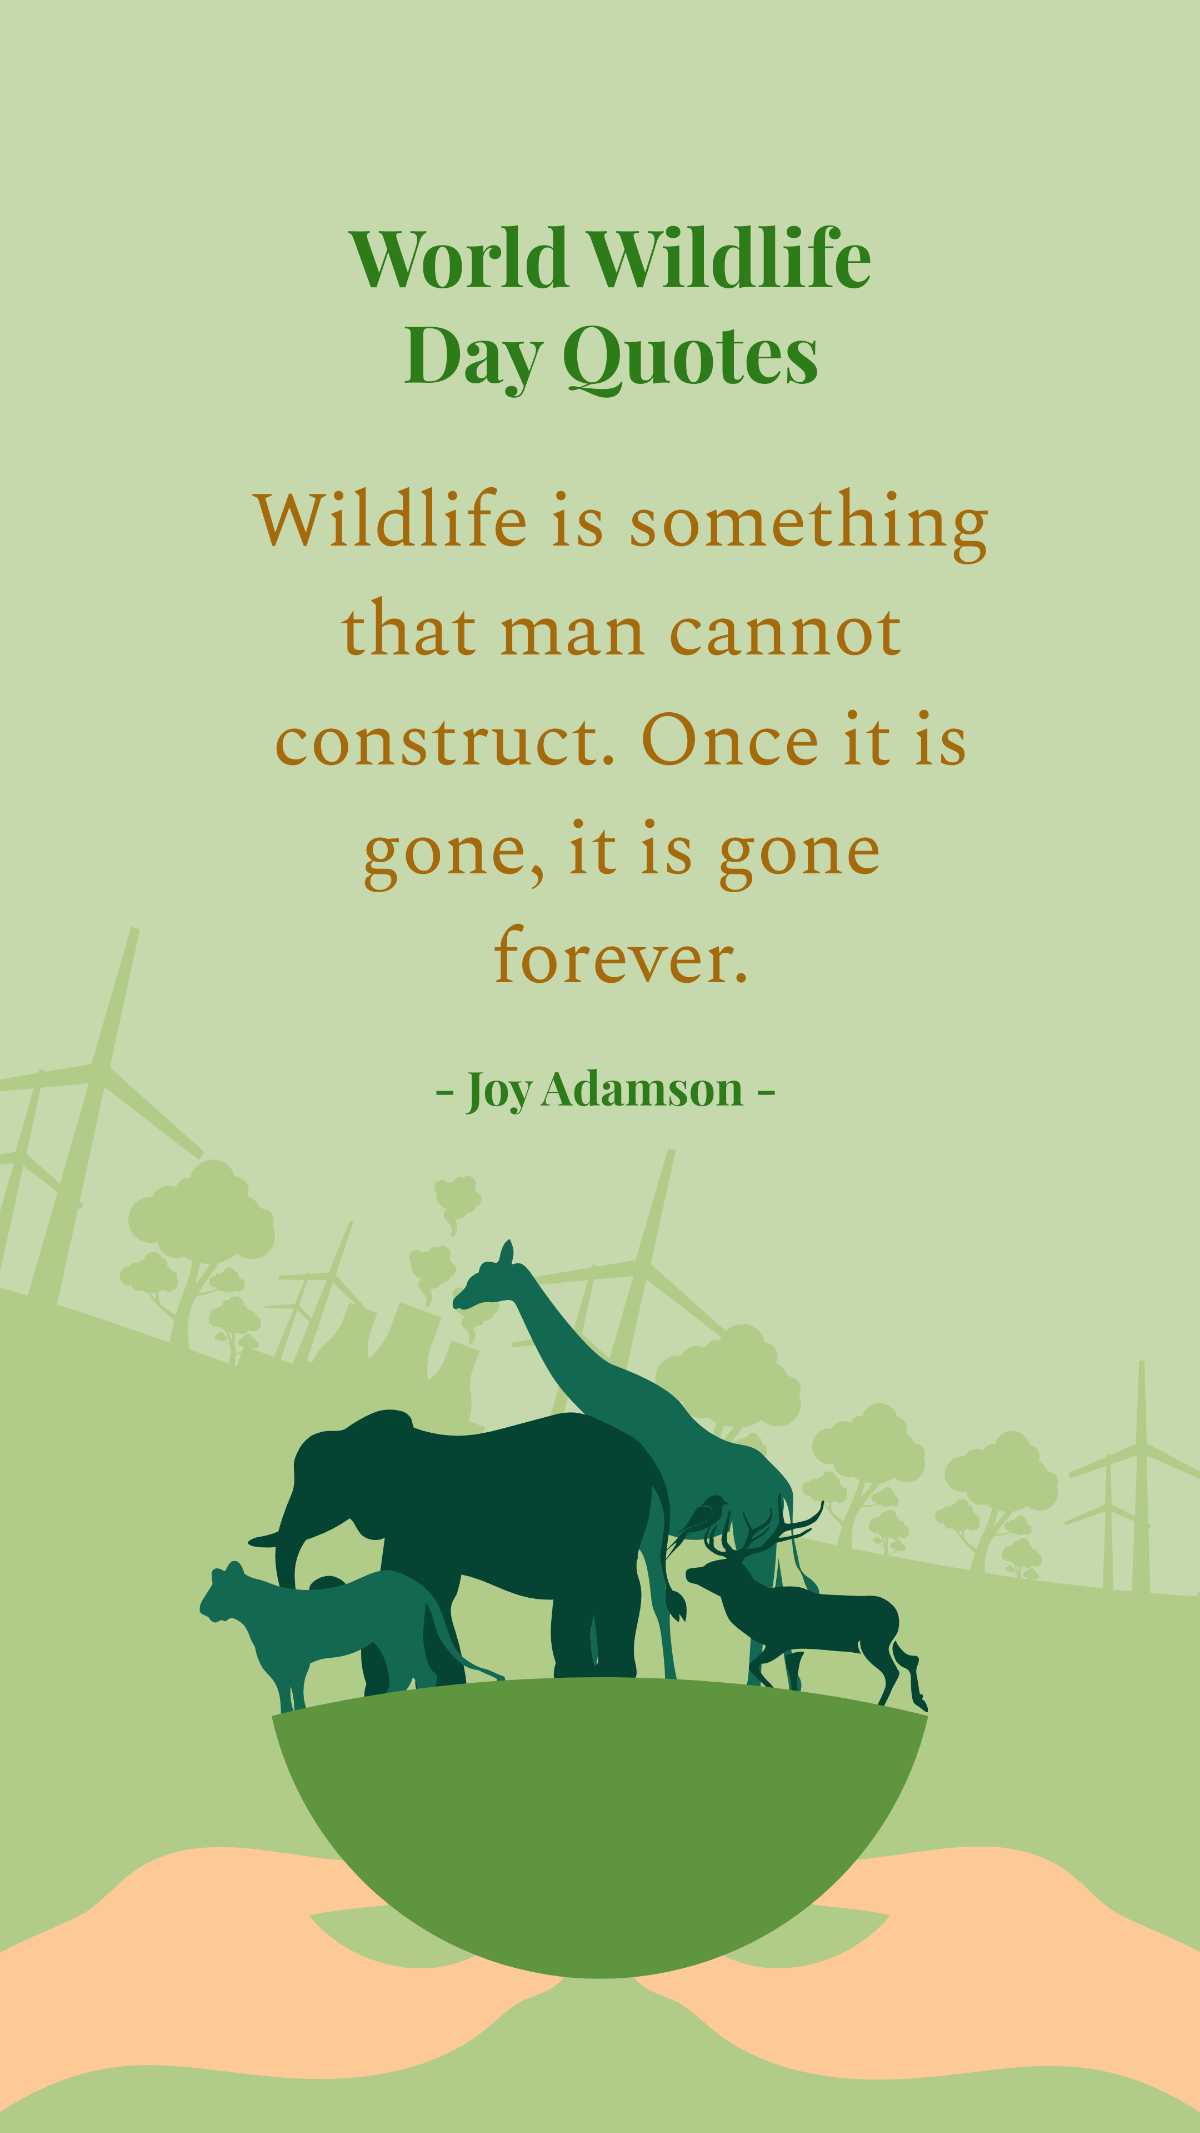 World Wildlife Day Quote Template